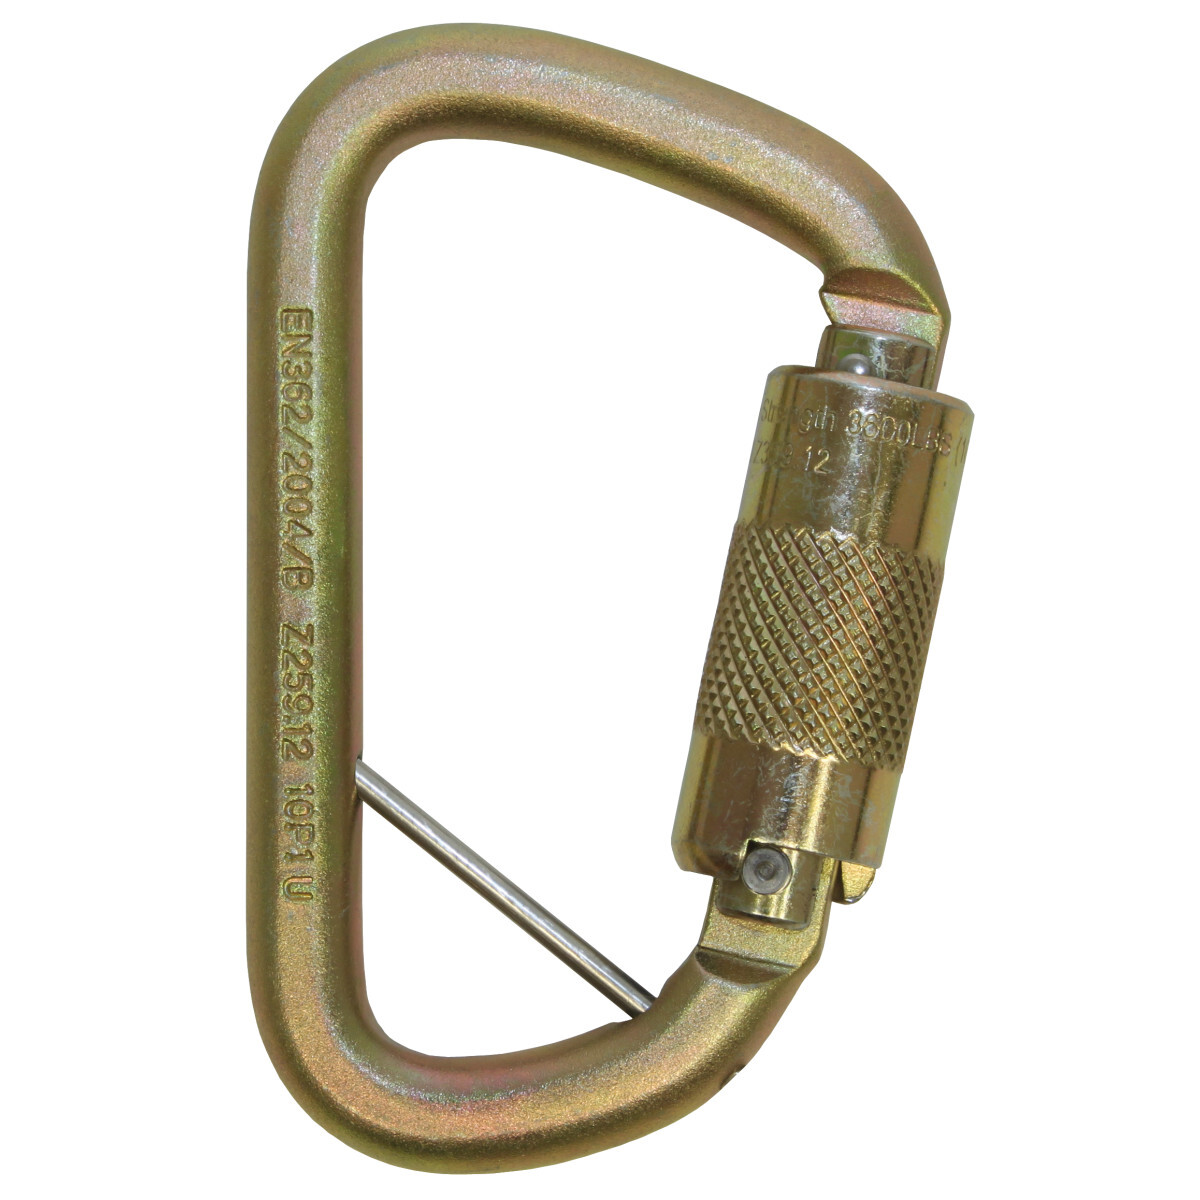 3M™ DBI-SALA® Rollgliss™ Technical Rescue Offset D Fall Arrest Carabiner with Captive Eye, 2000117, Gold, Medium